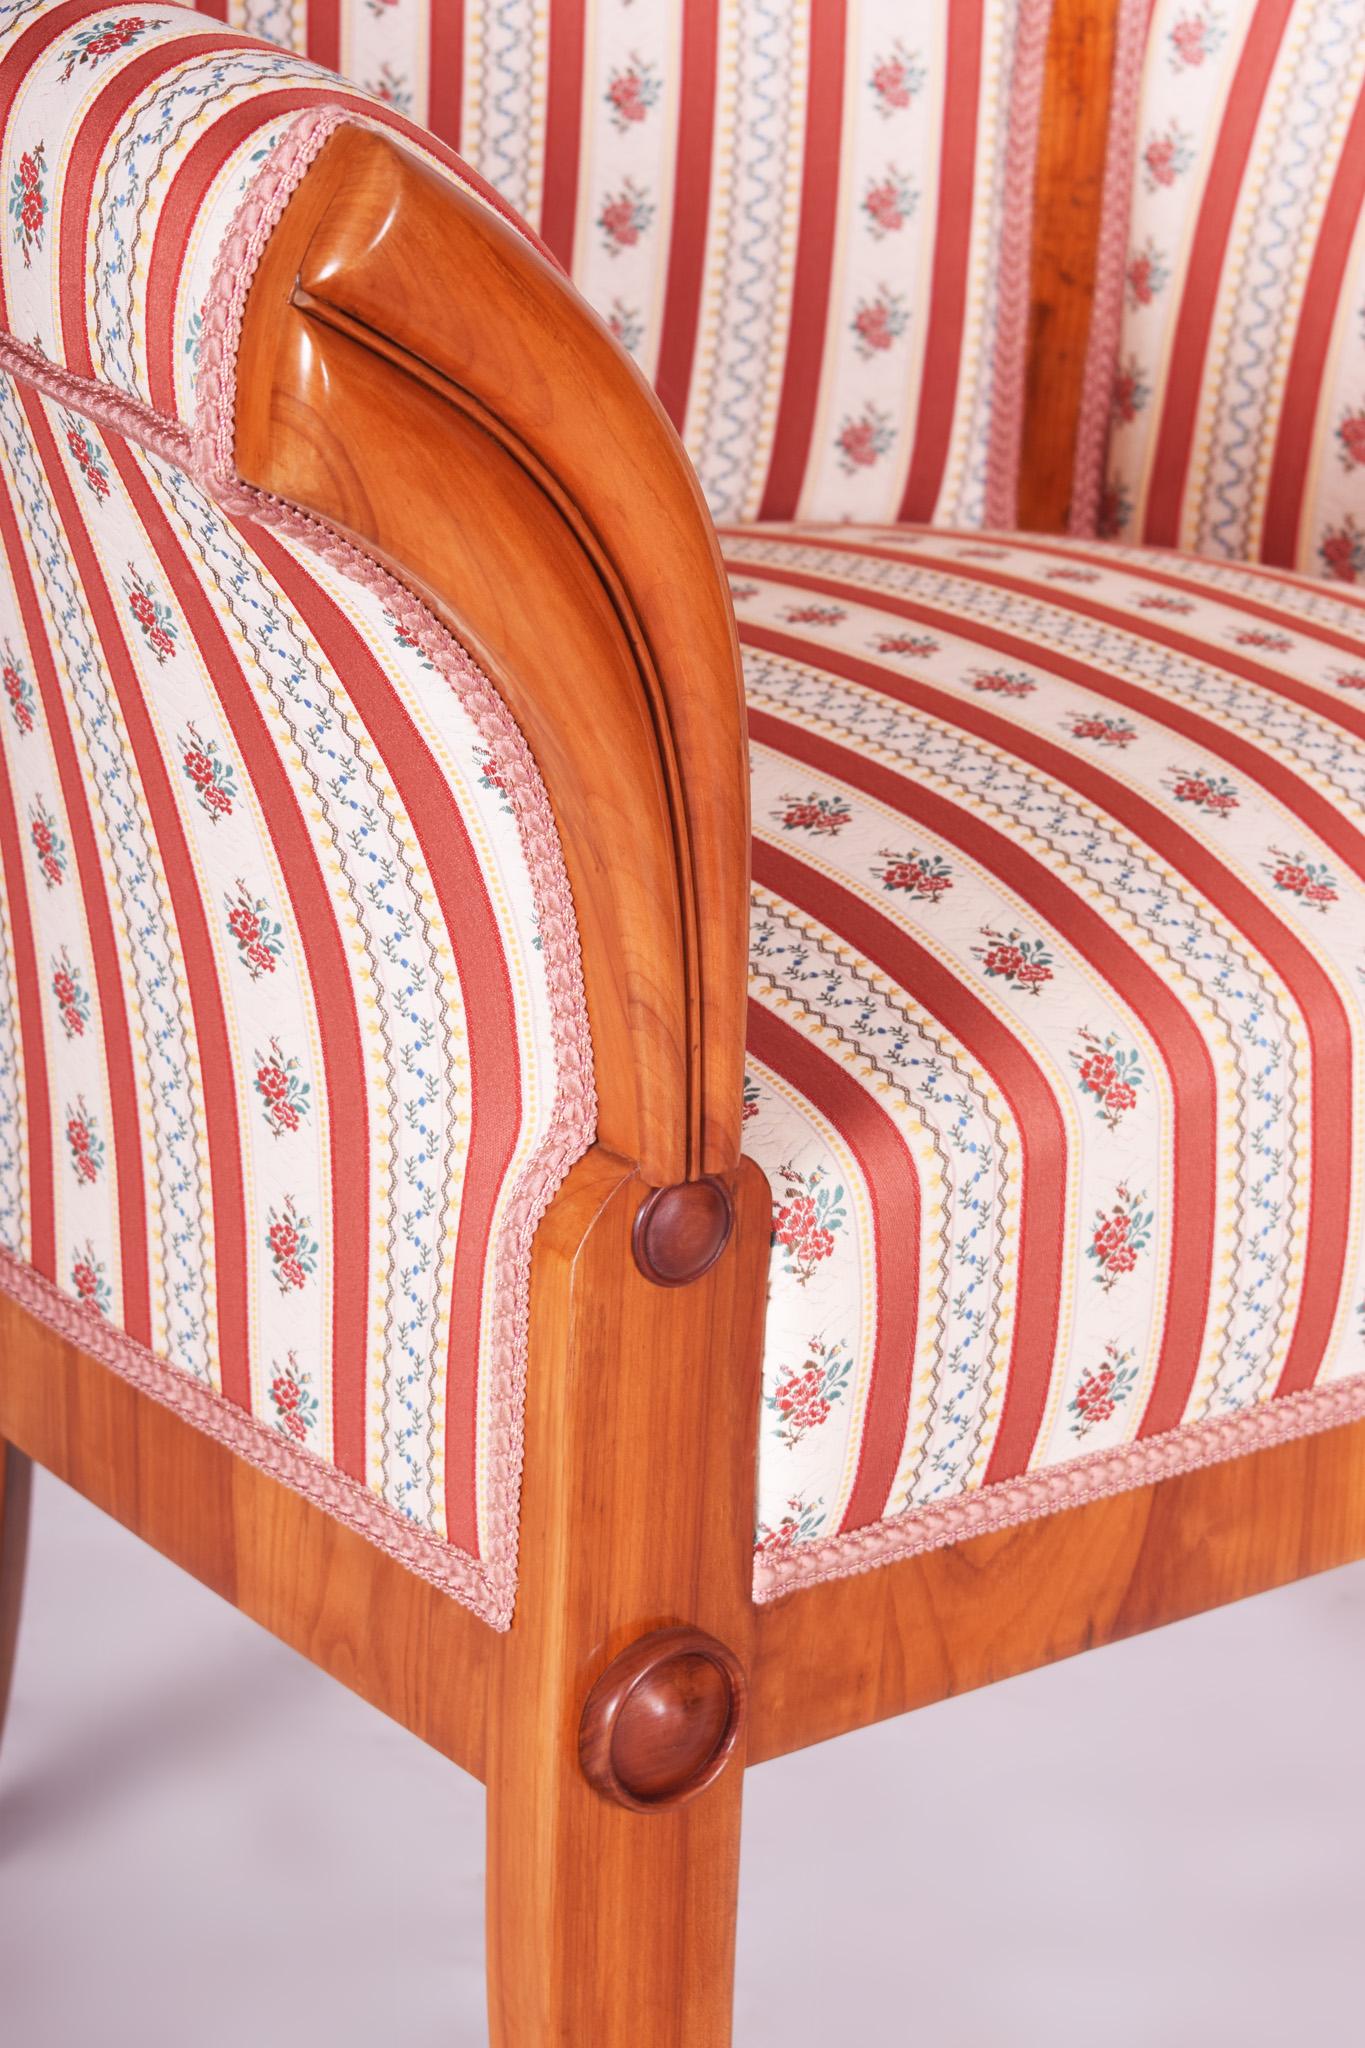 Biedermeier armchair from Austria
Material: Cherry tree.
Completely restored.
New fabric.
Shellac-polish.